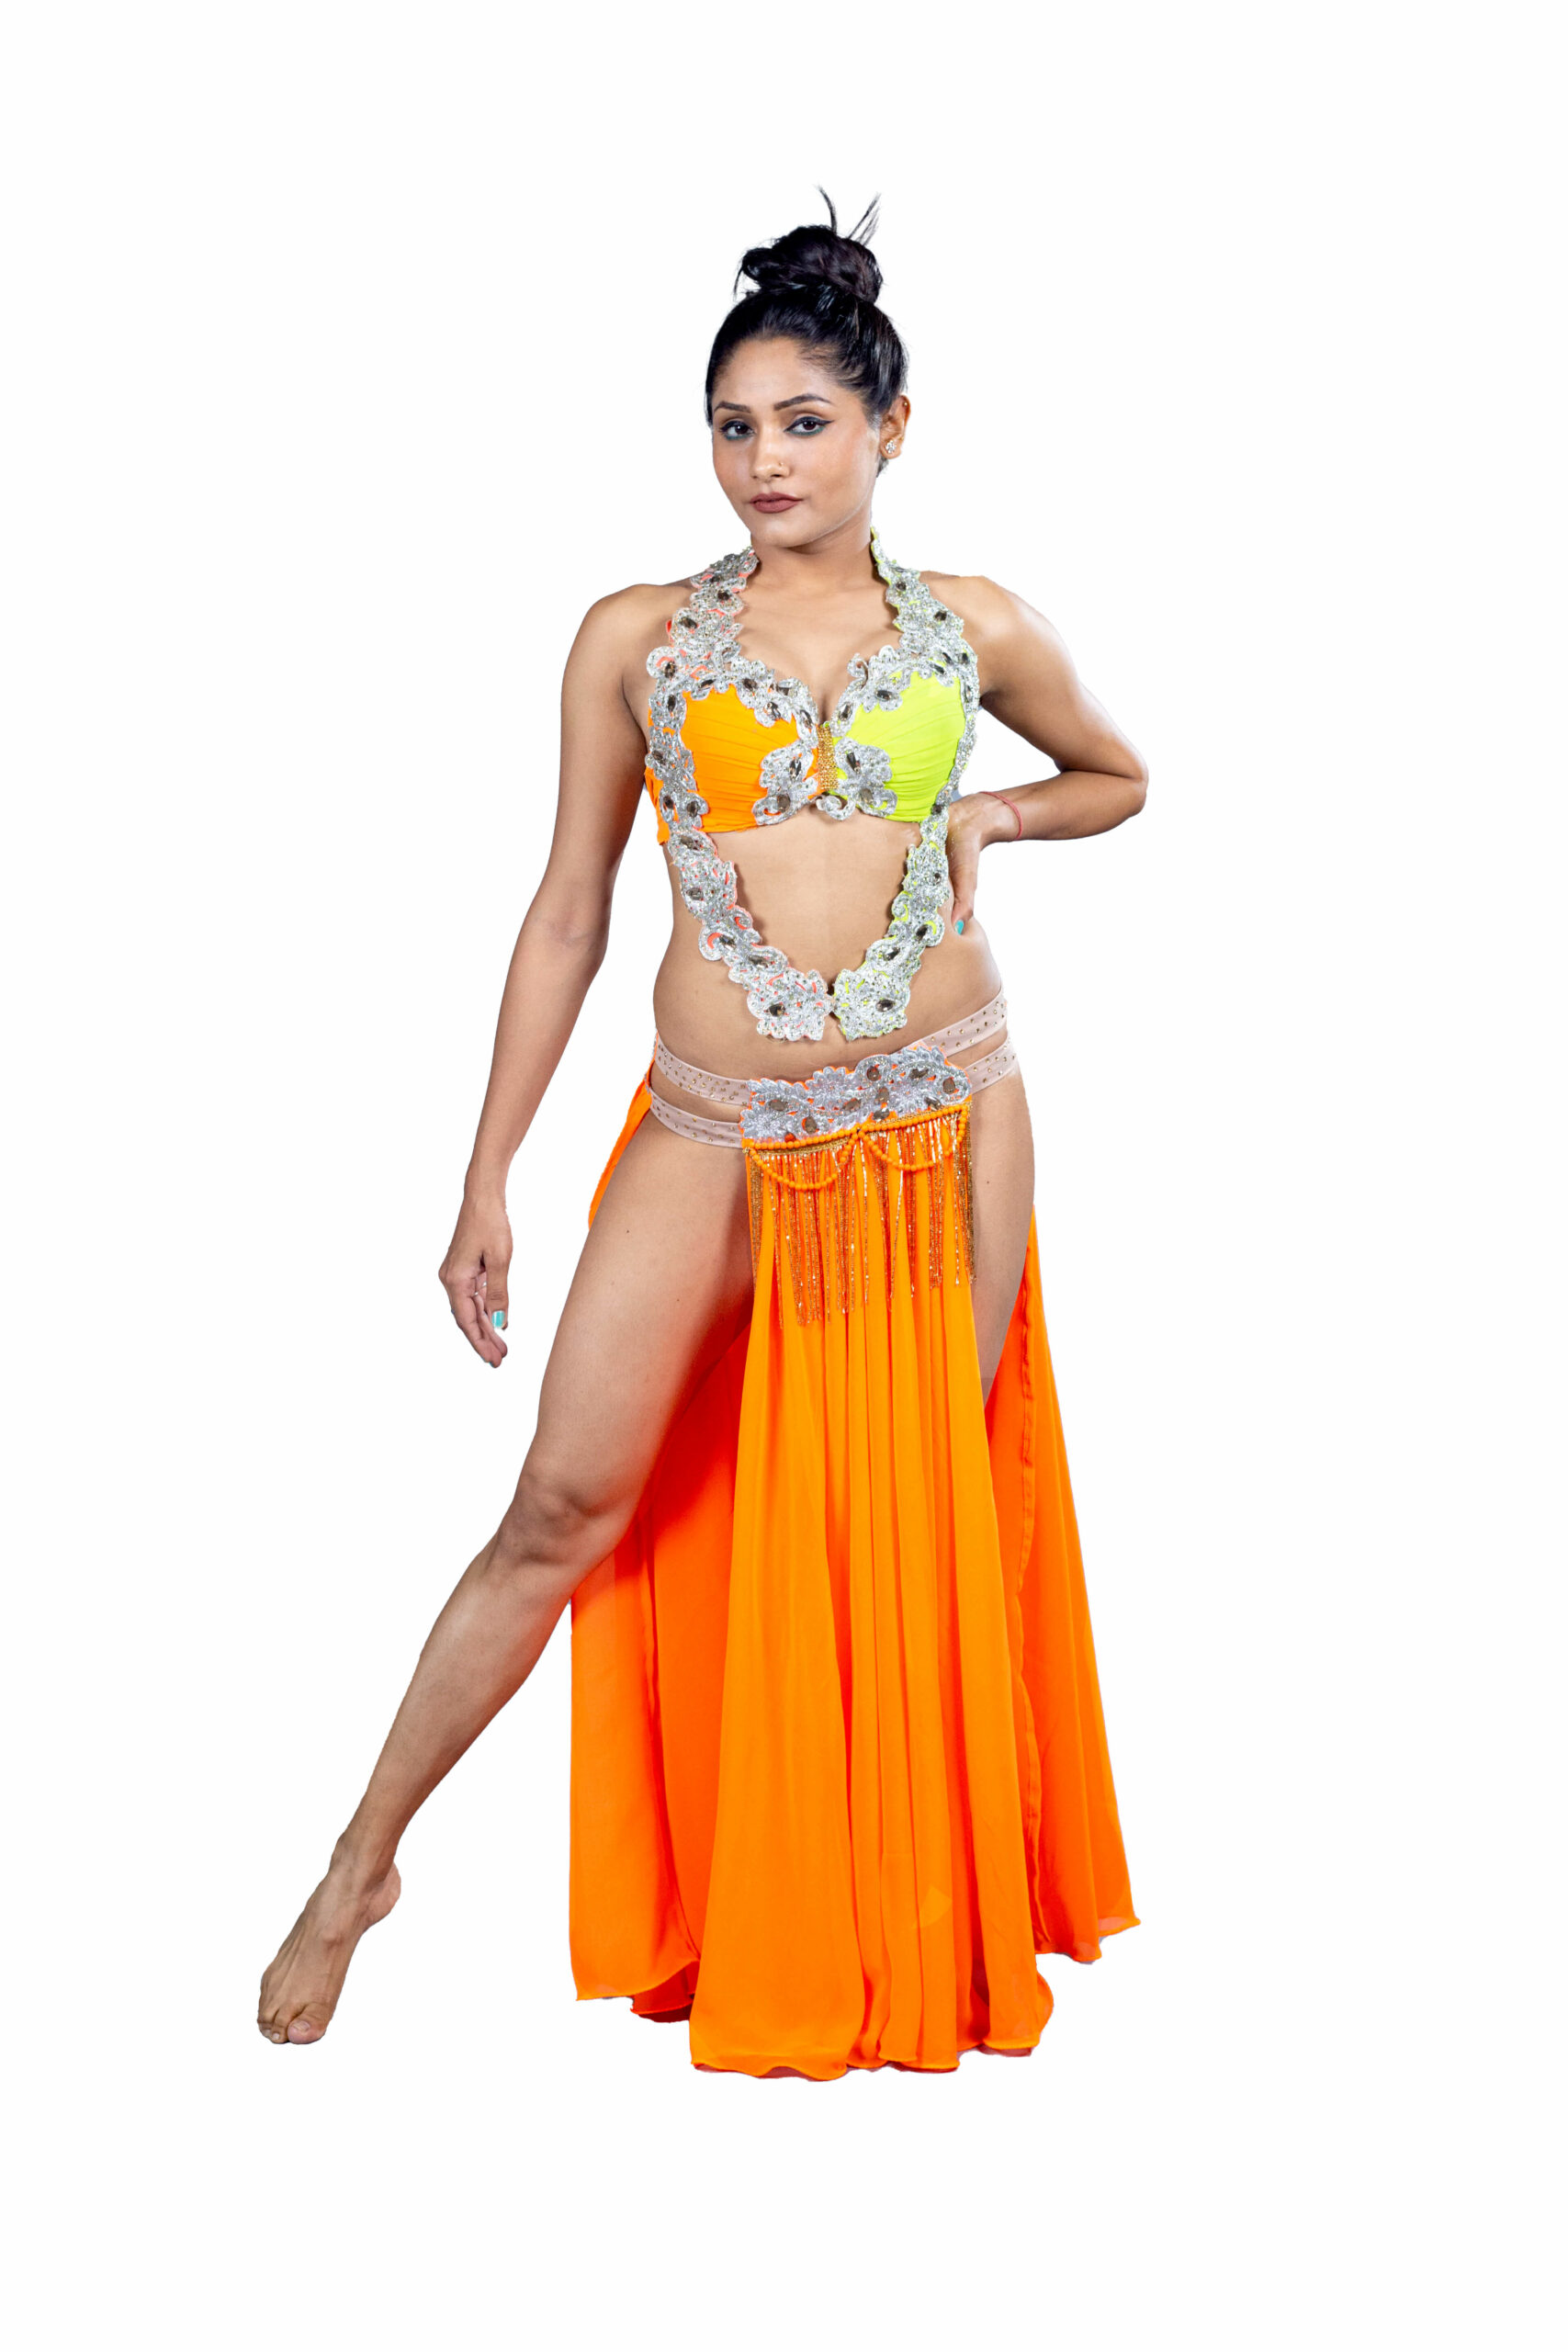 Belly dance outfit, Belly dance costumes, Belly dancer costumes